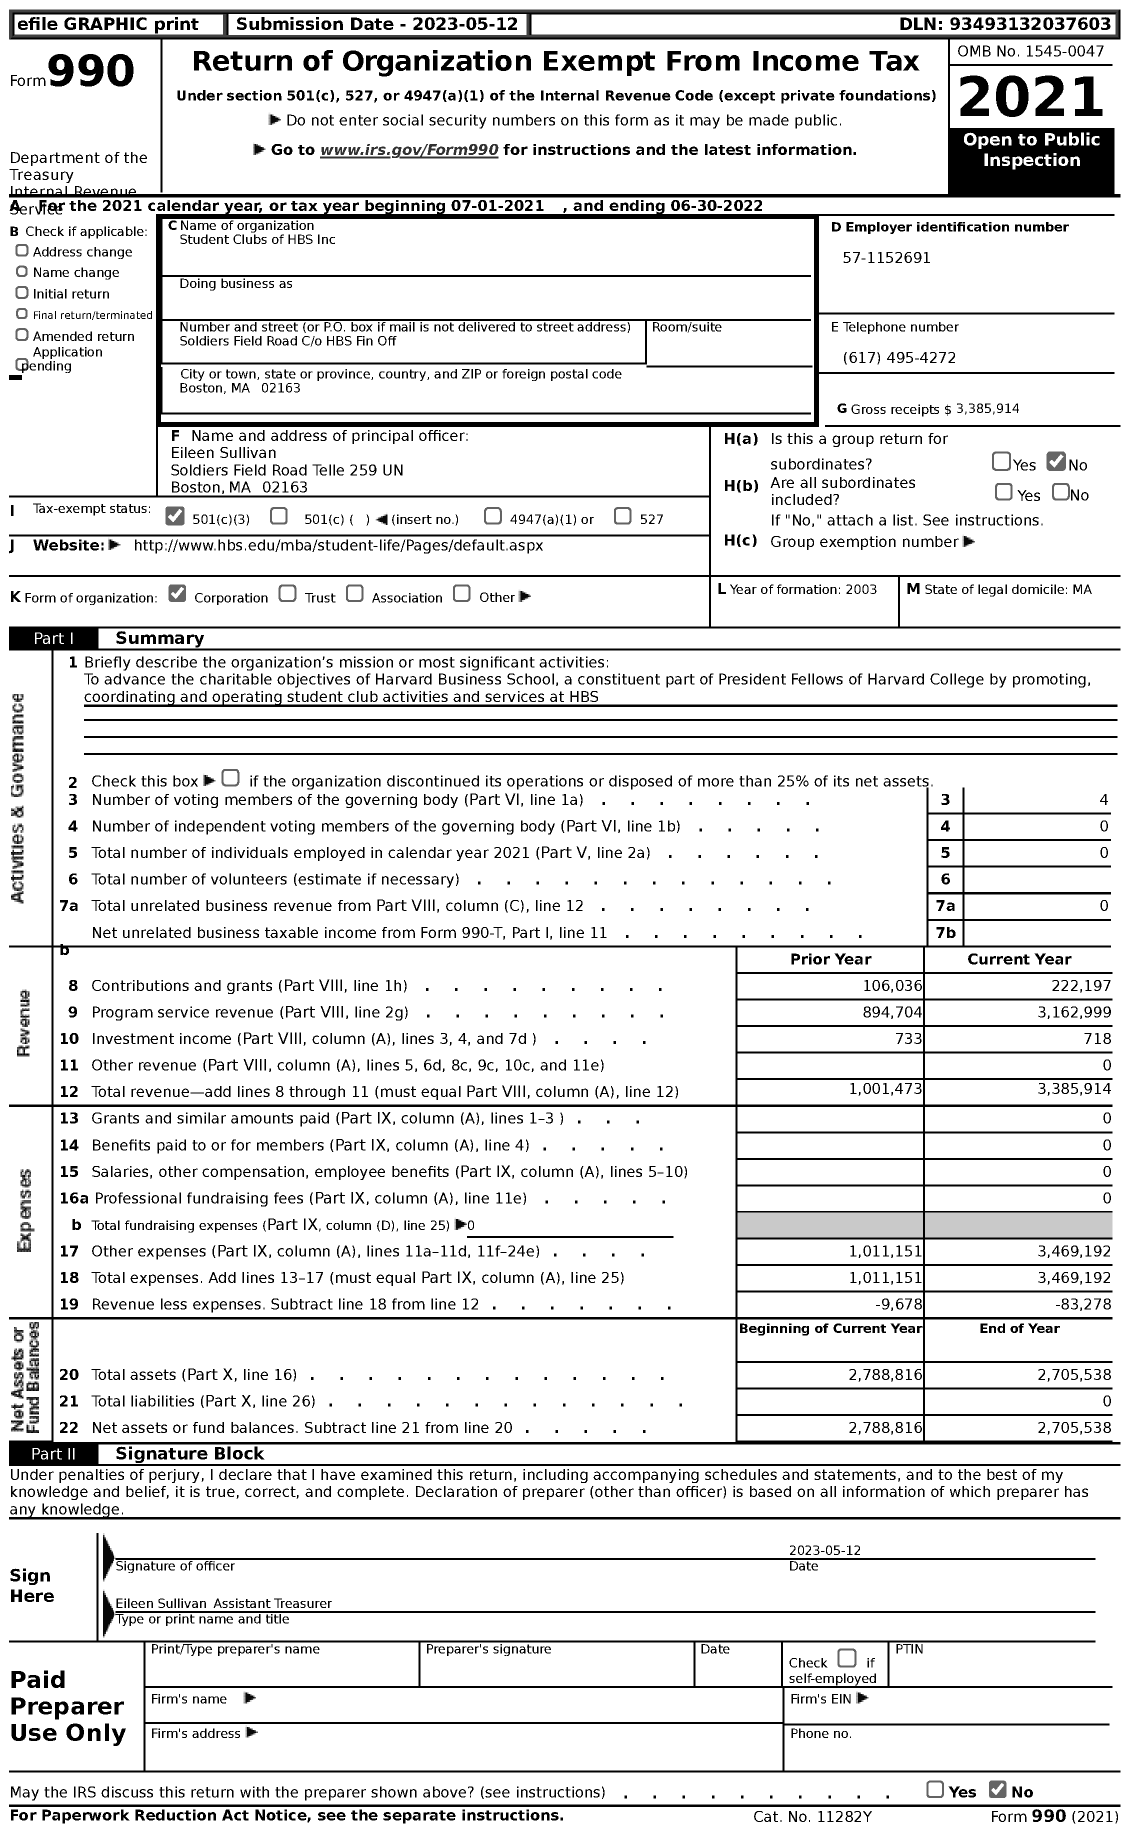 Image of first page of 2021 Form 990 for Student Clubs of HBS